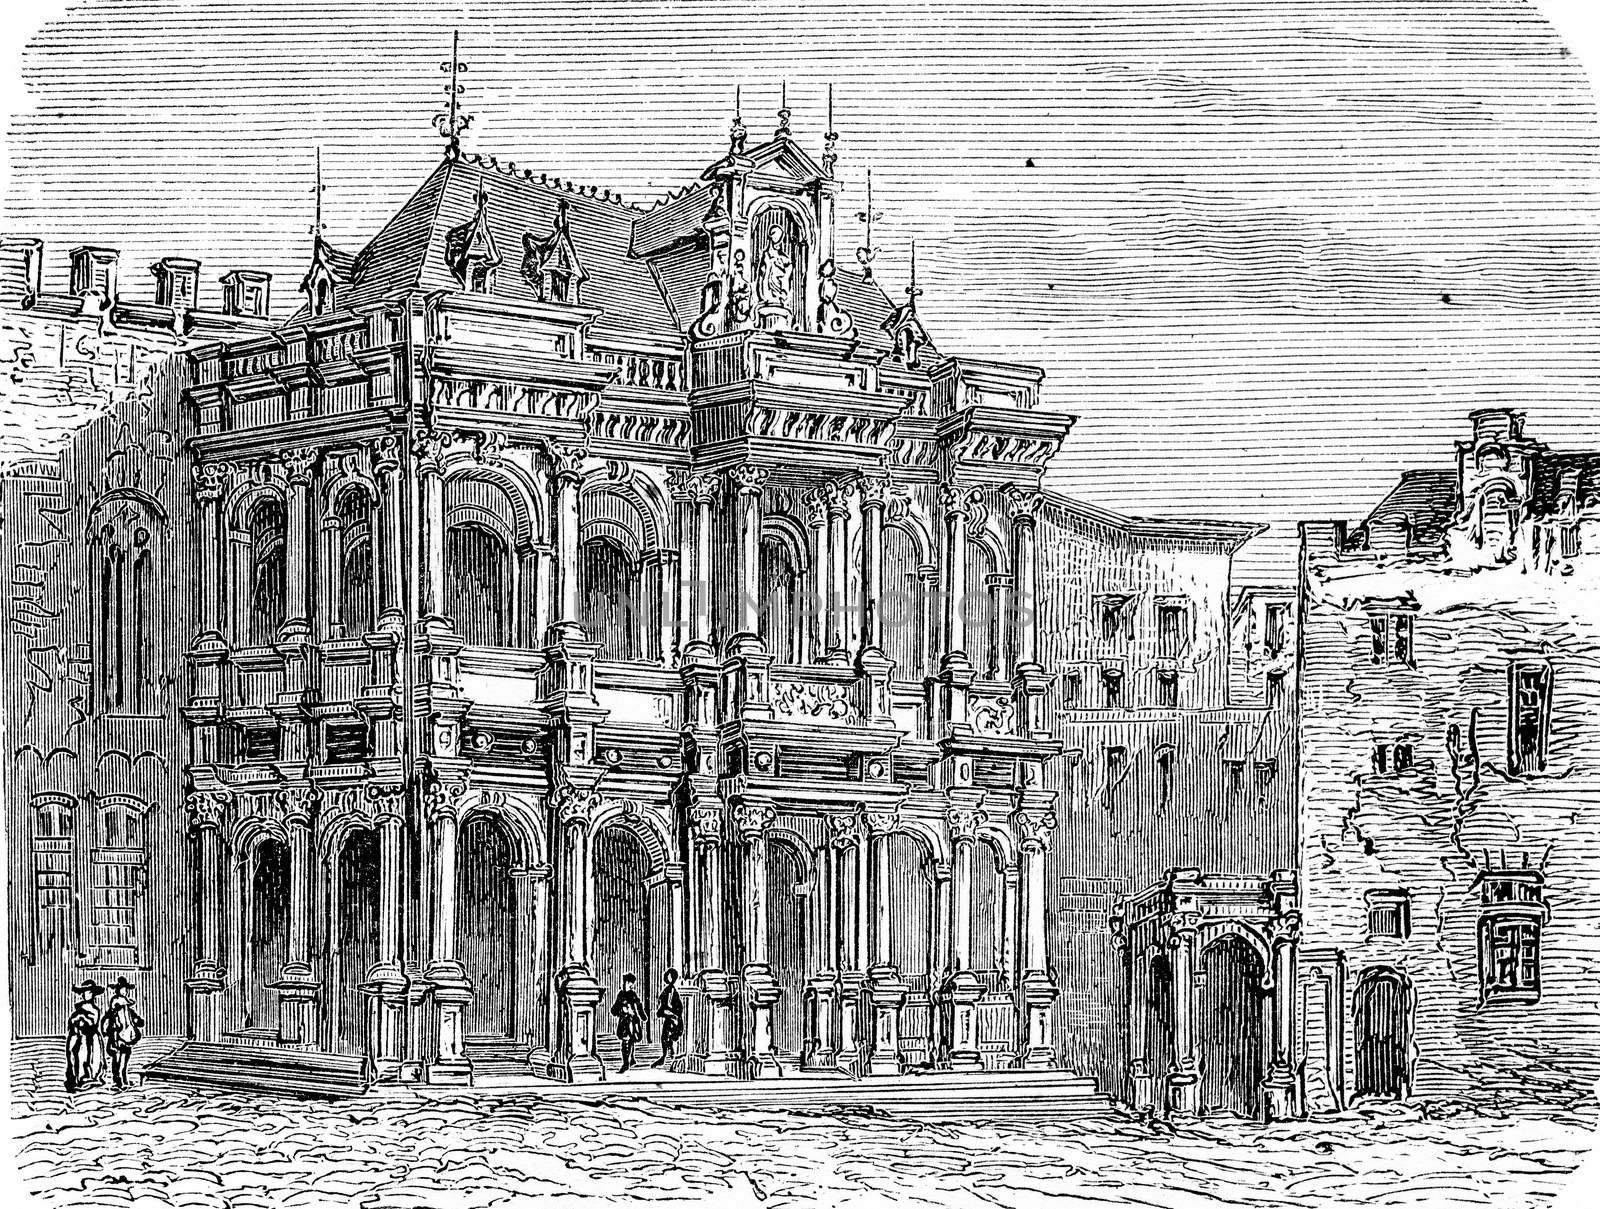 Cologne City Hall, vintage engraved illustration. From Chemin des Ecoliers, 1861.
